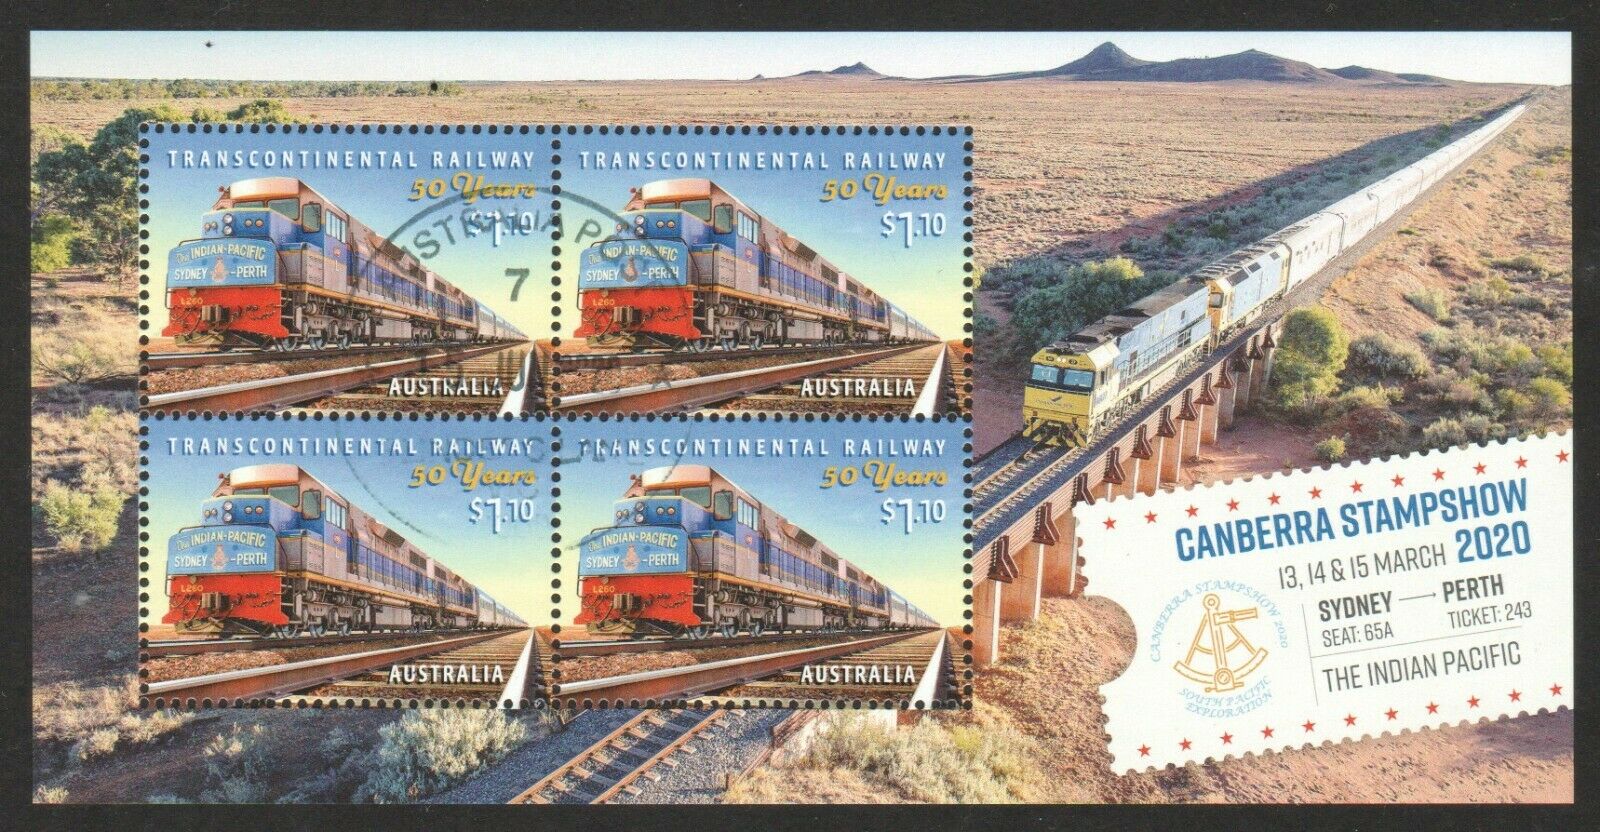 Australia 2020 Canberra Stamp Show (railway) Souvenir Sheet Of 4 Stamps In Used